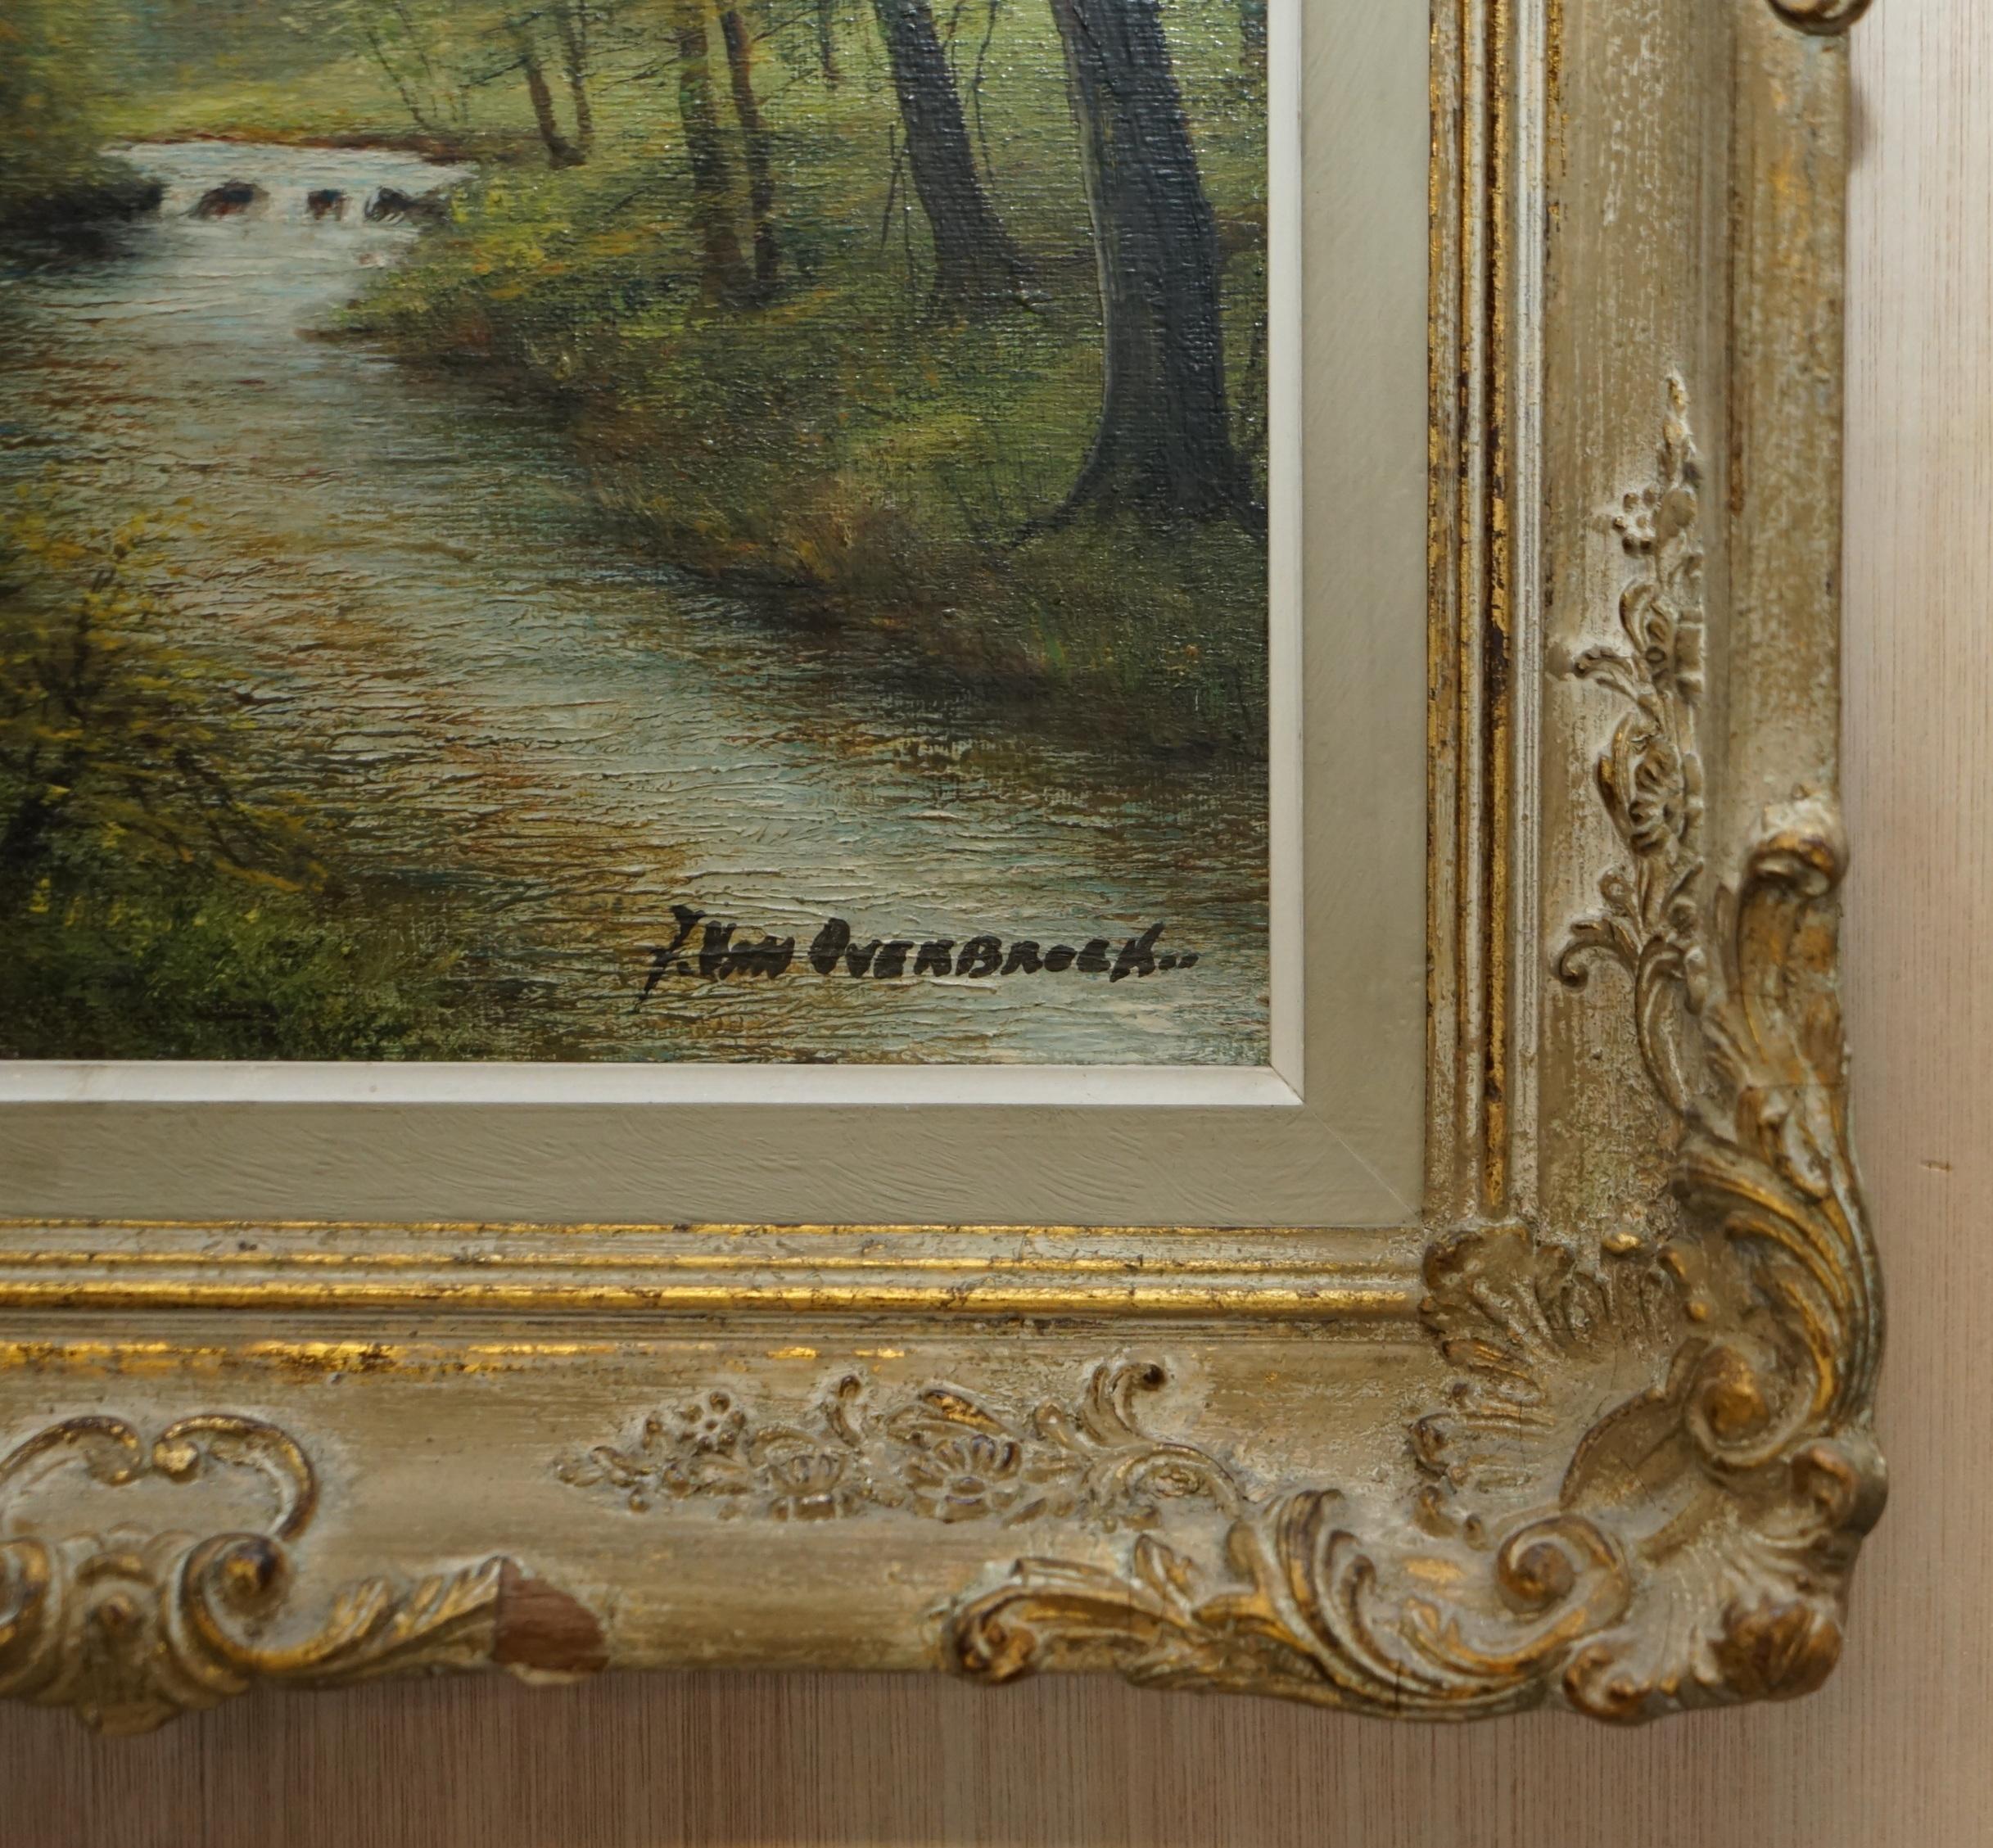 Hand-Painted Antique Flemish Oil Painting Signed Van Overbroek circa 1880 Lovely Rural Scene For Sale